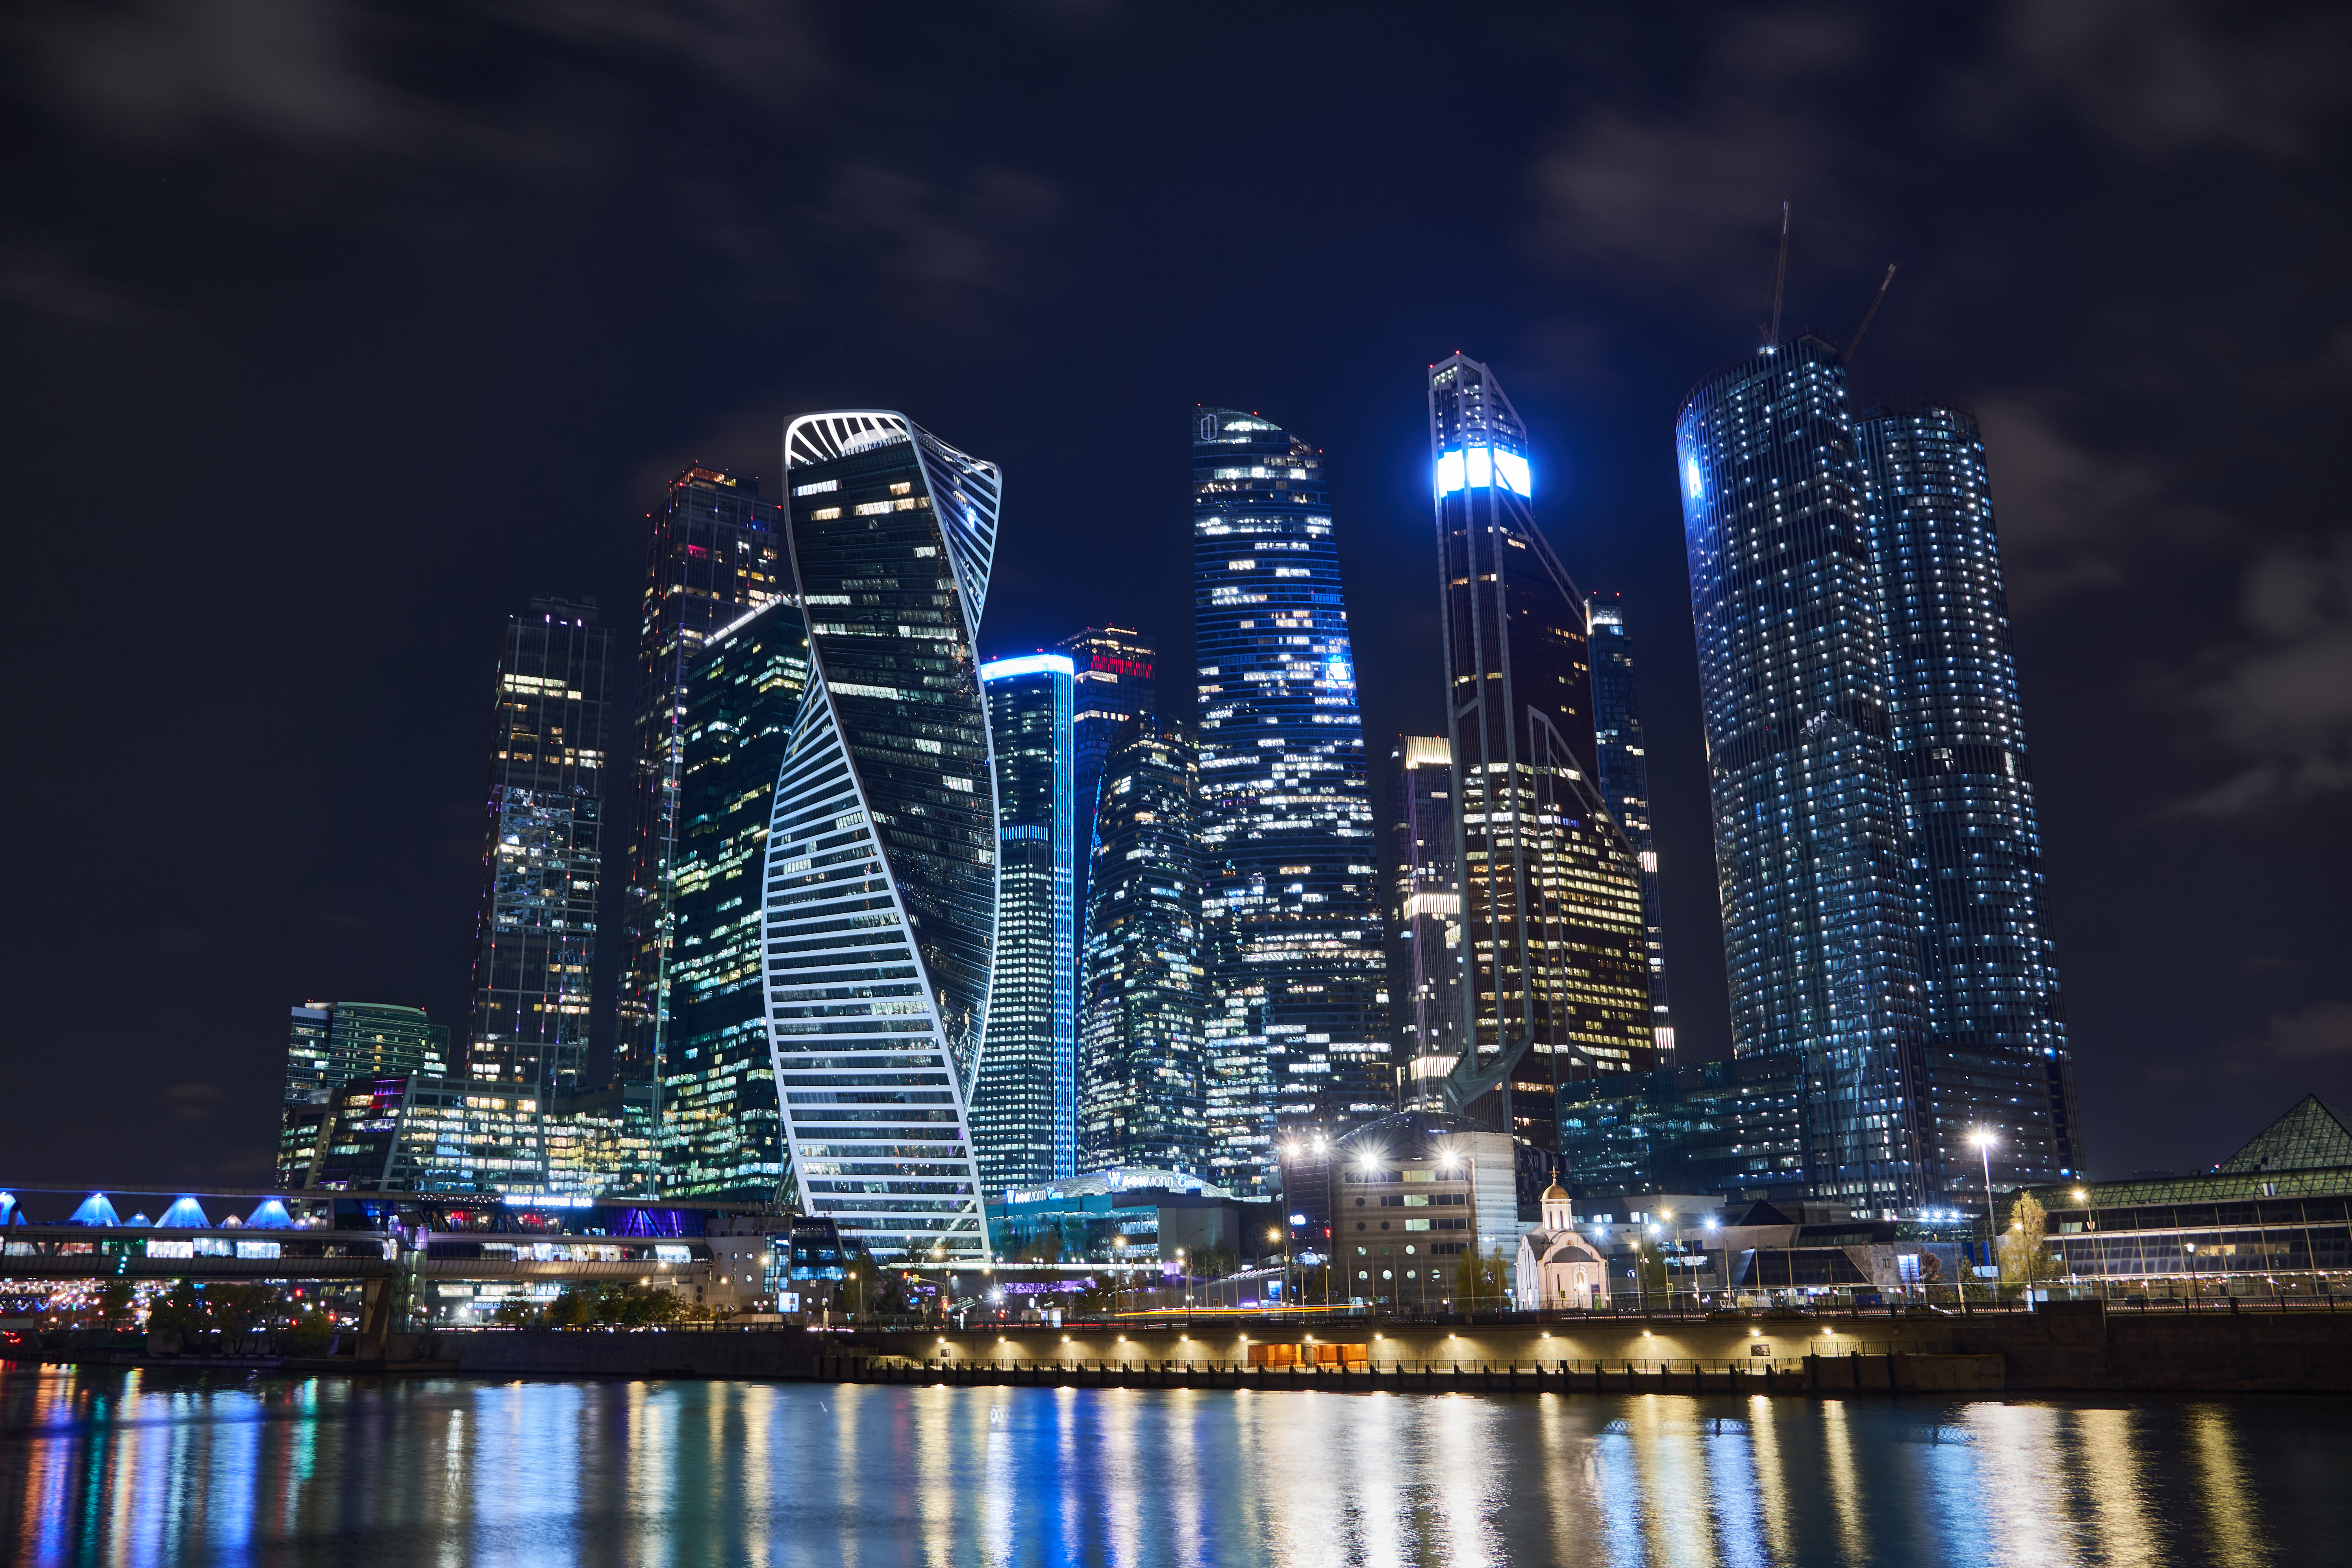 Moscow Building Architecture Modern Lights Russia Night City City Lights Water Sky Clouds Photograph 5974x3983